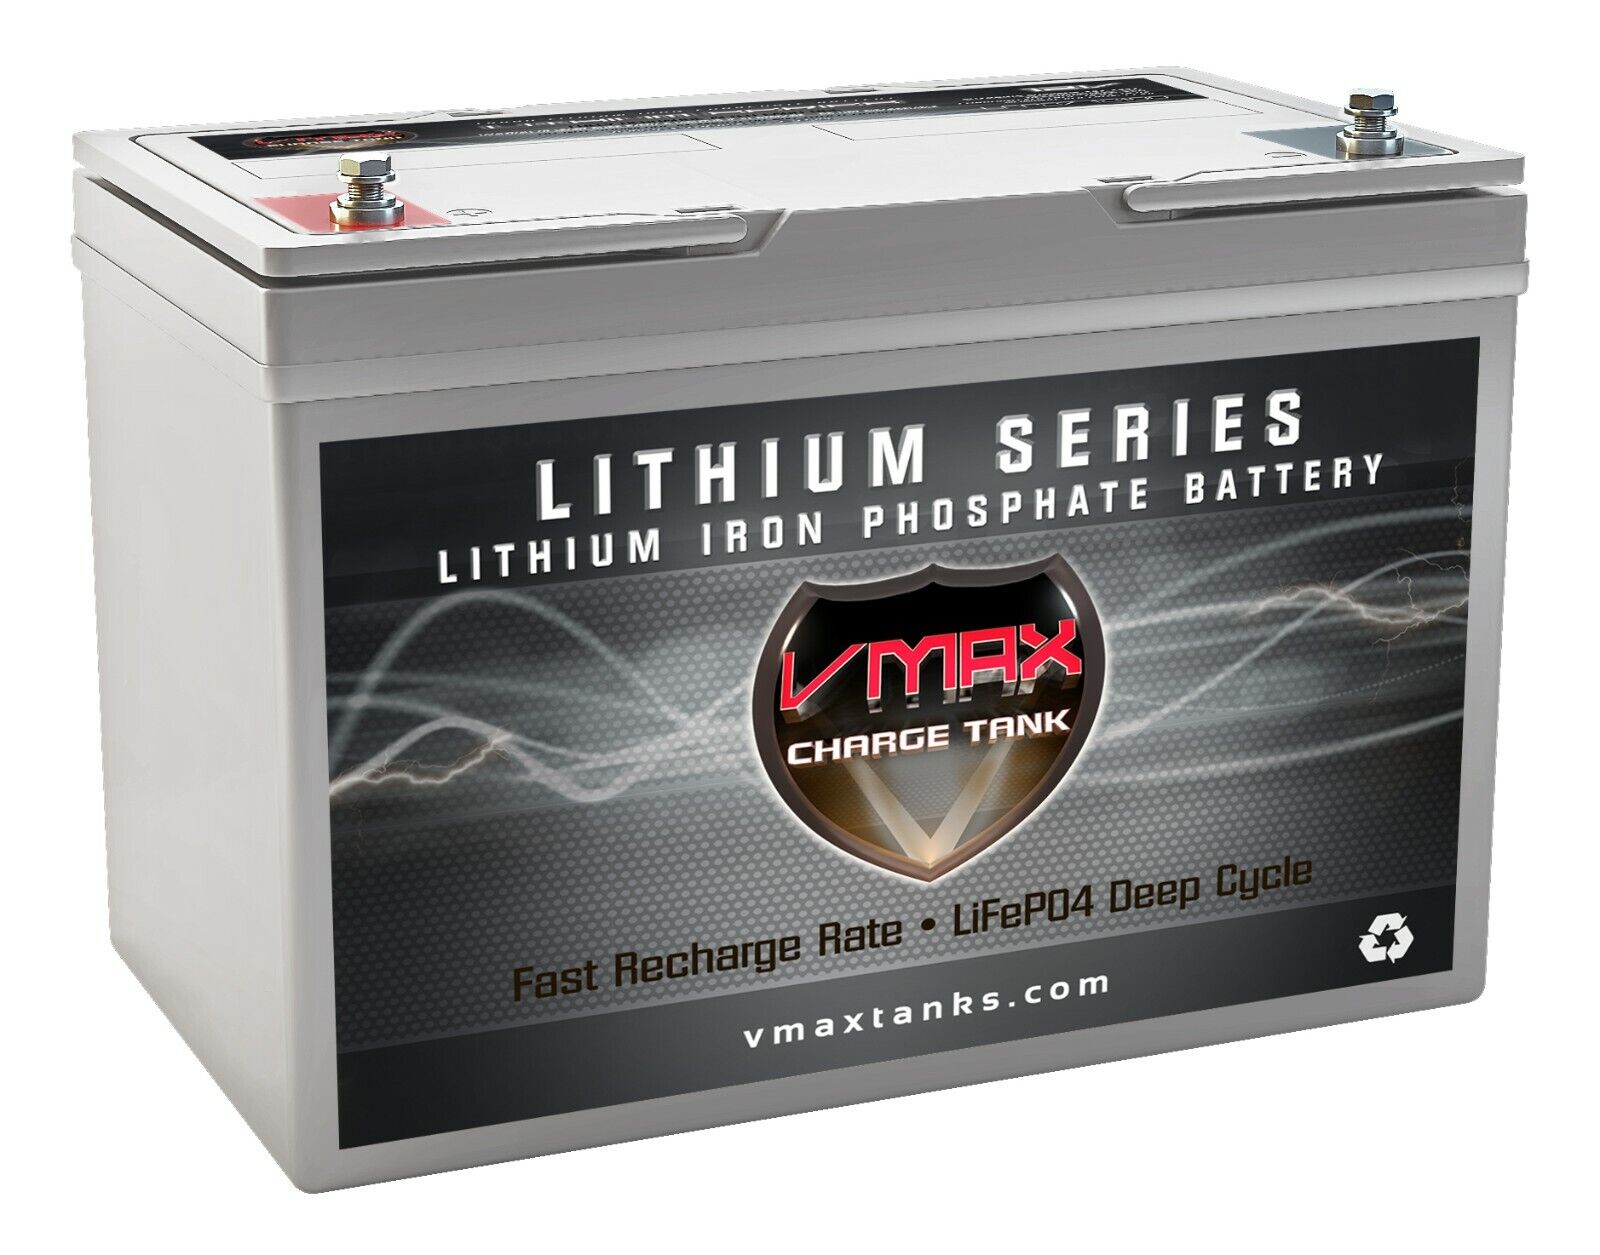 LFP27-12100 Grp 27 Lithium 12V 100AH Battery Battery for AC to DC Inverter 25LBS